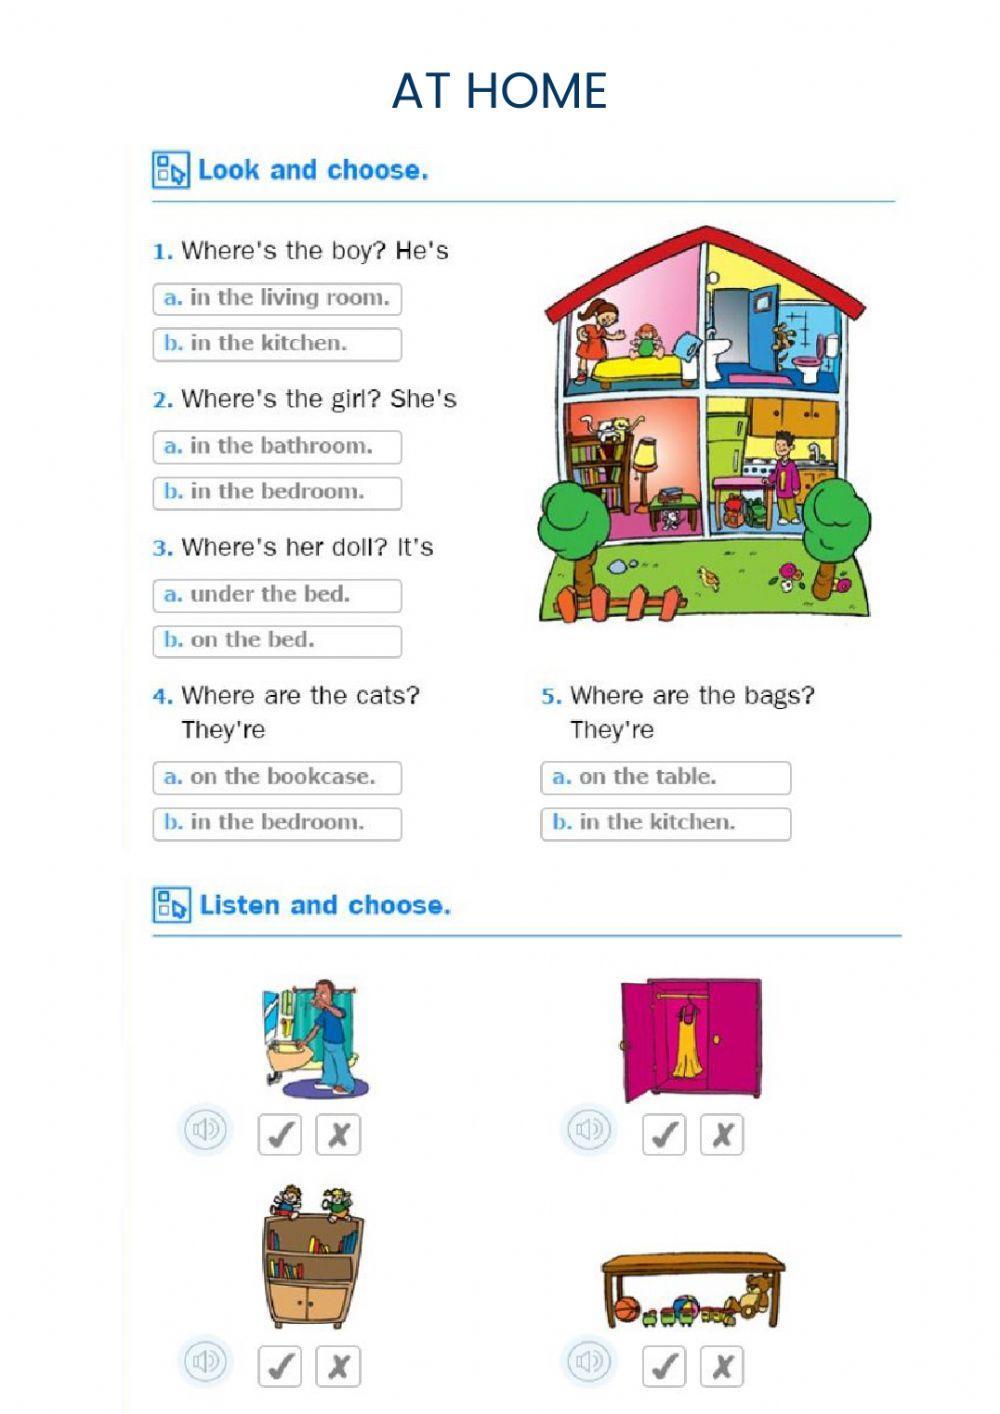 At home - Rooms & Prepositions